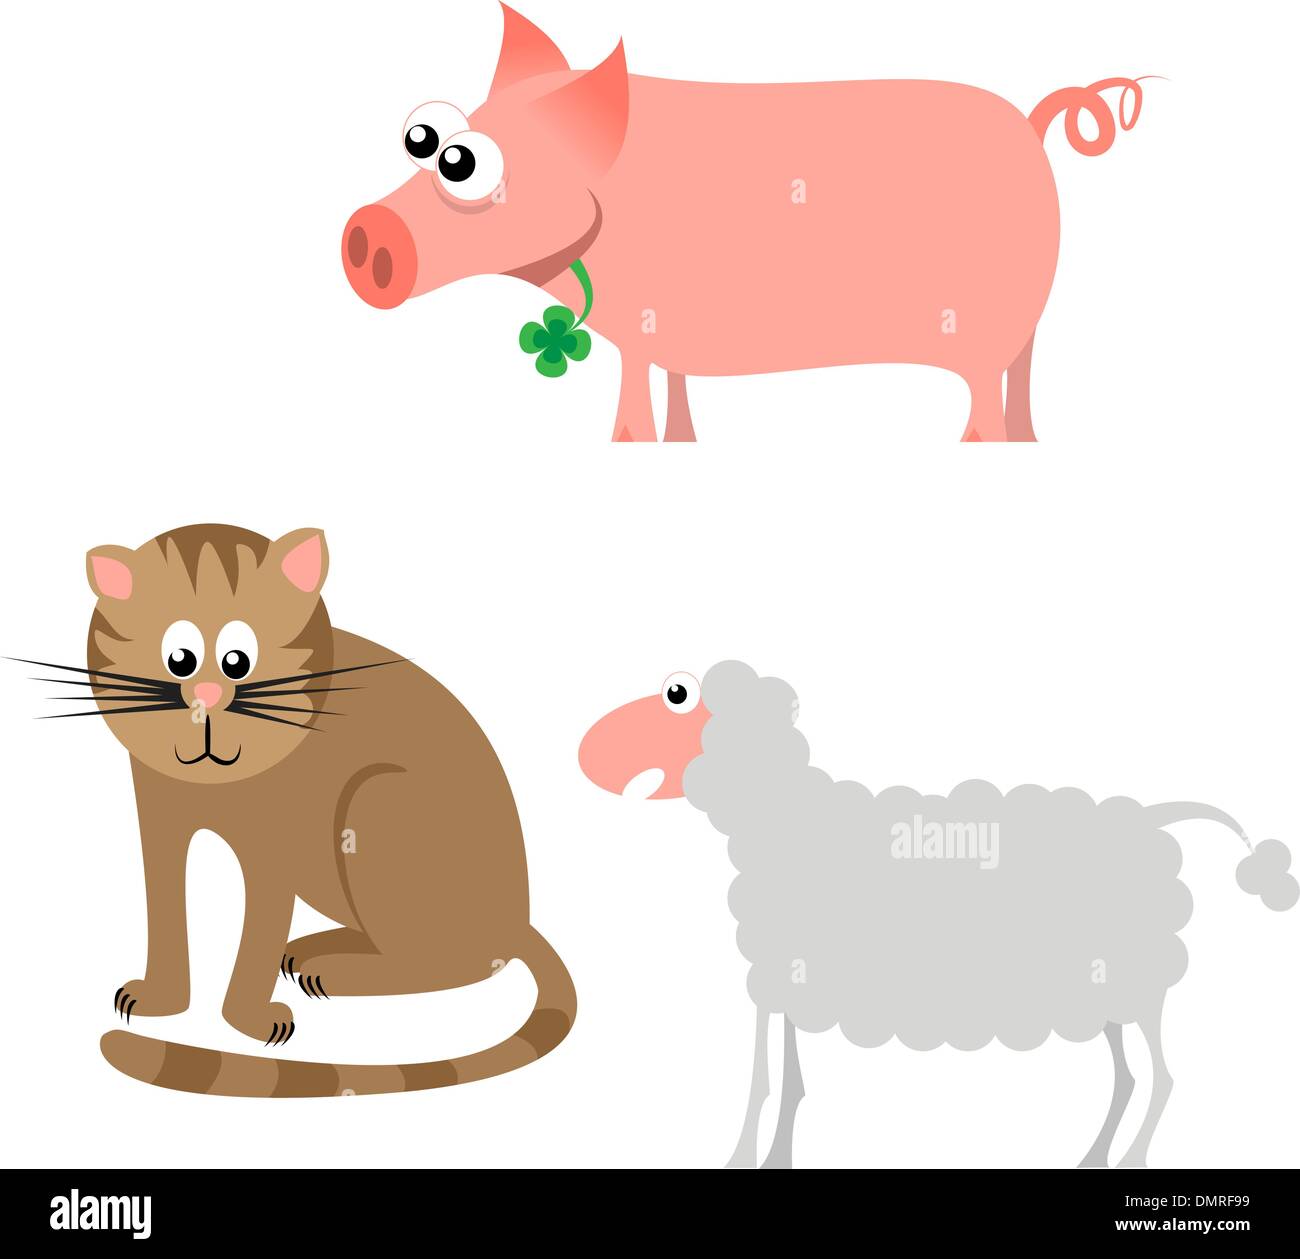 Pig, cat and sheet Stock Vector